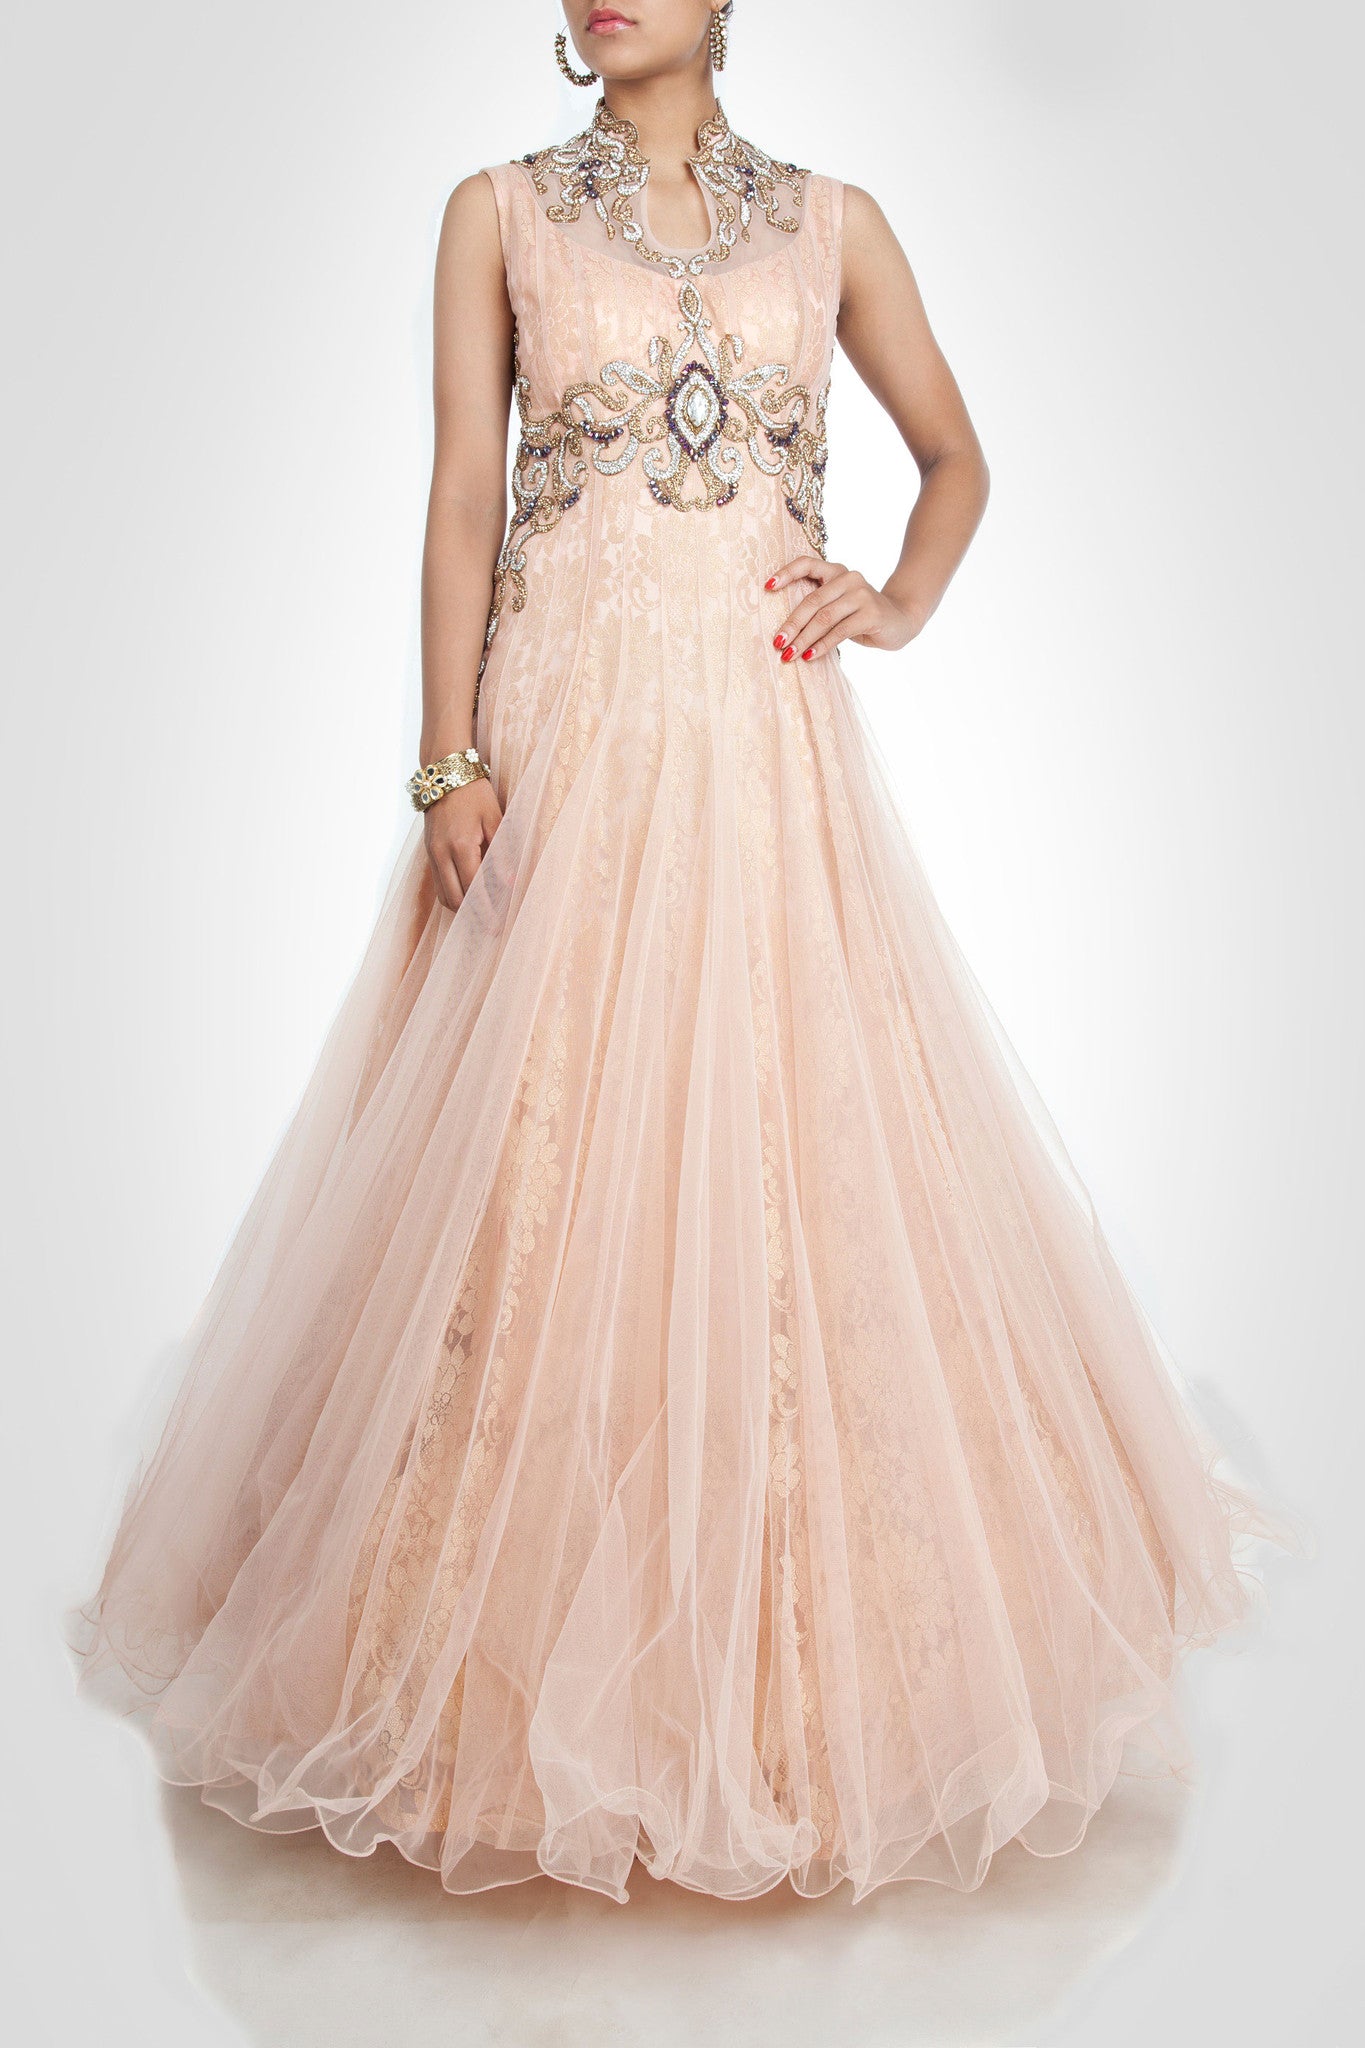 Peach color high-neck gown